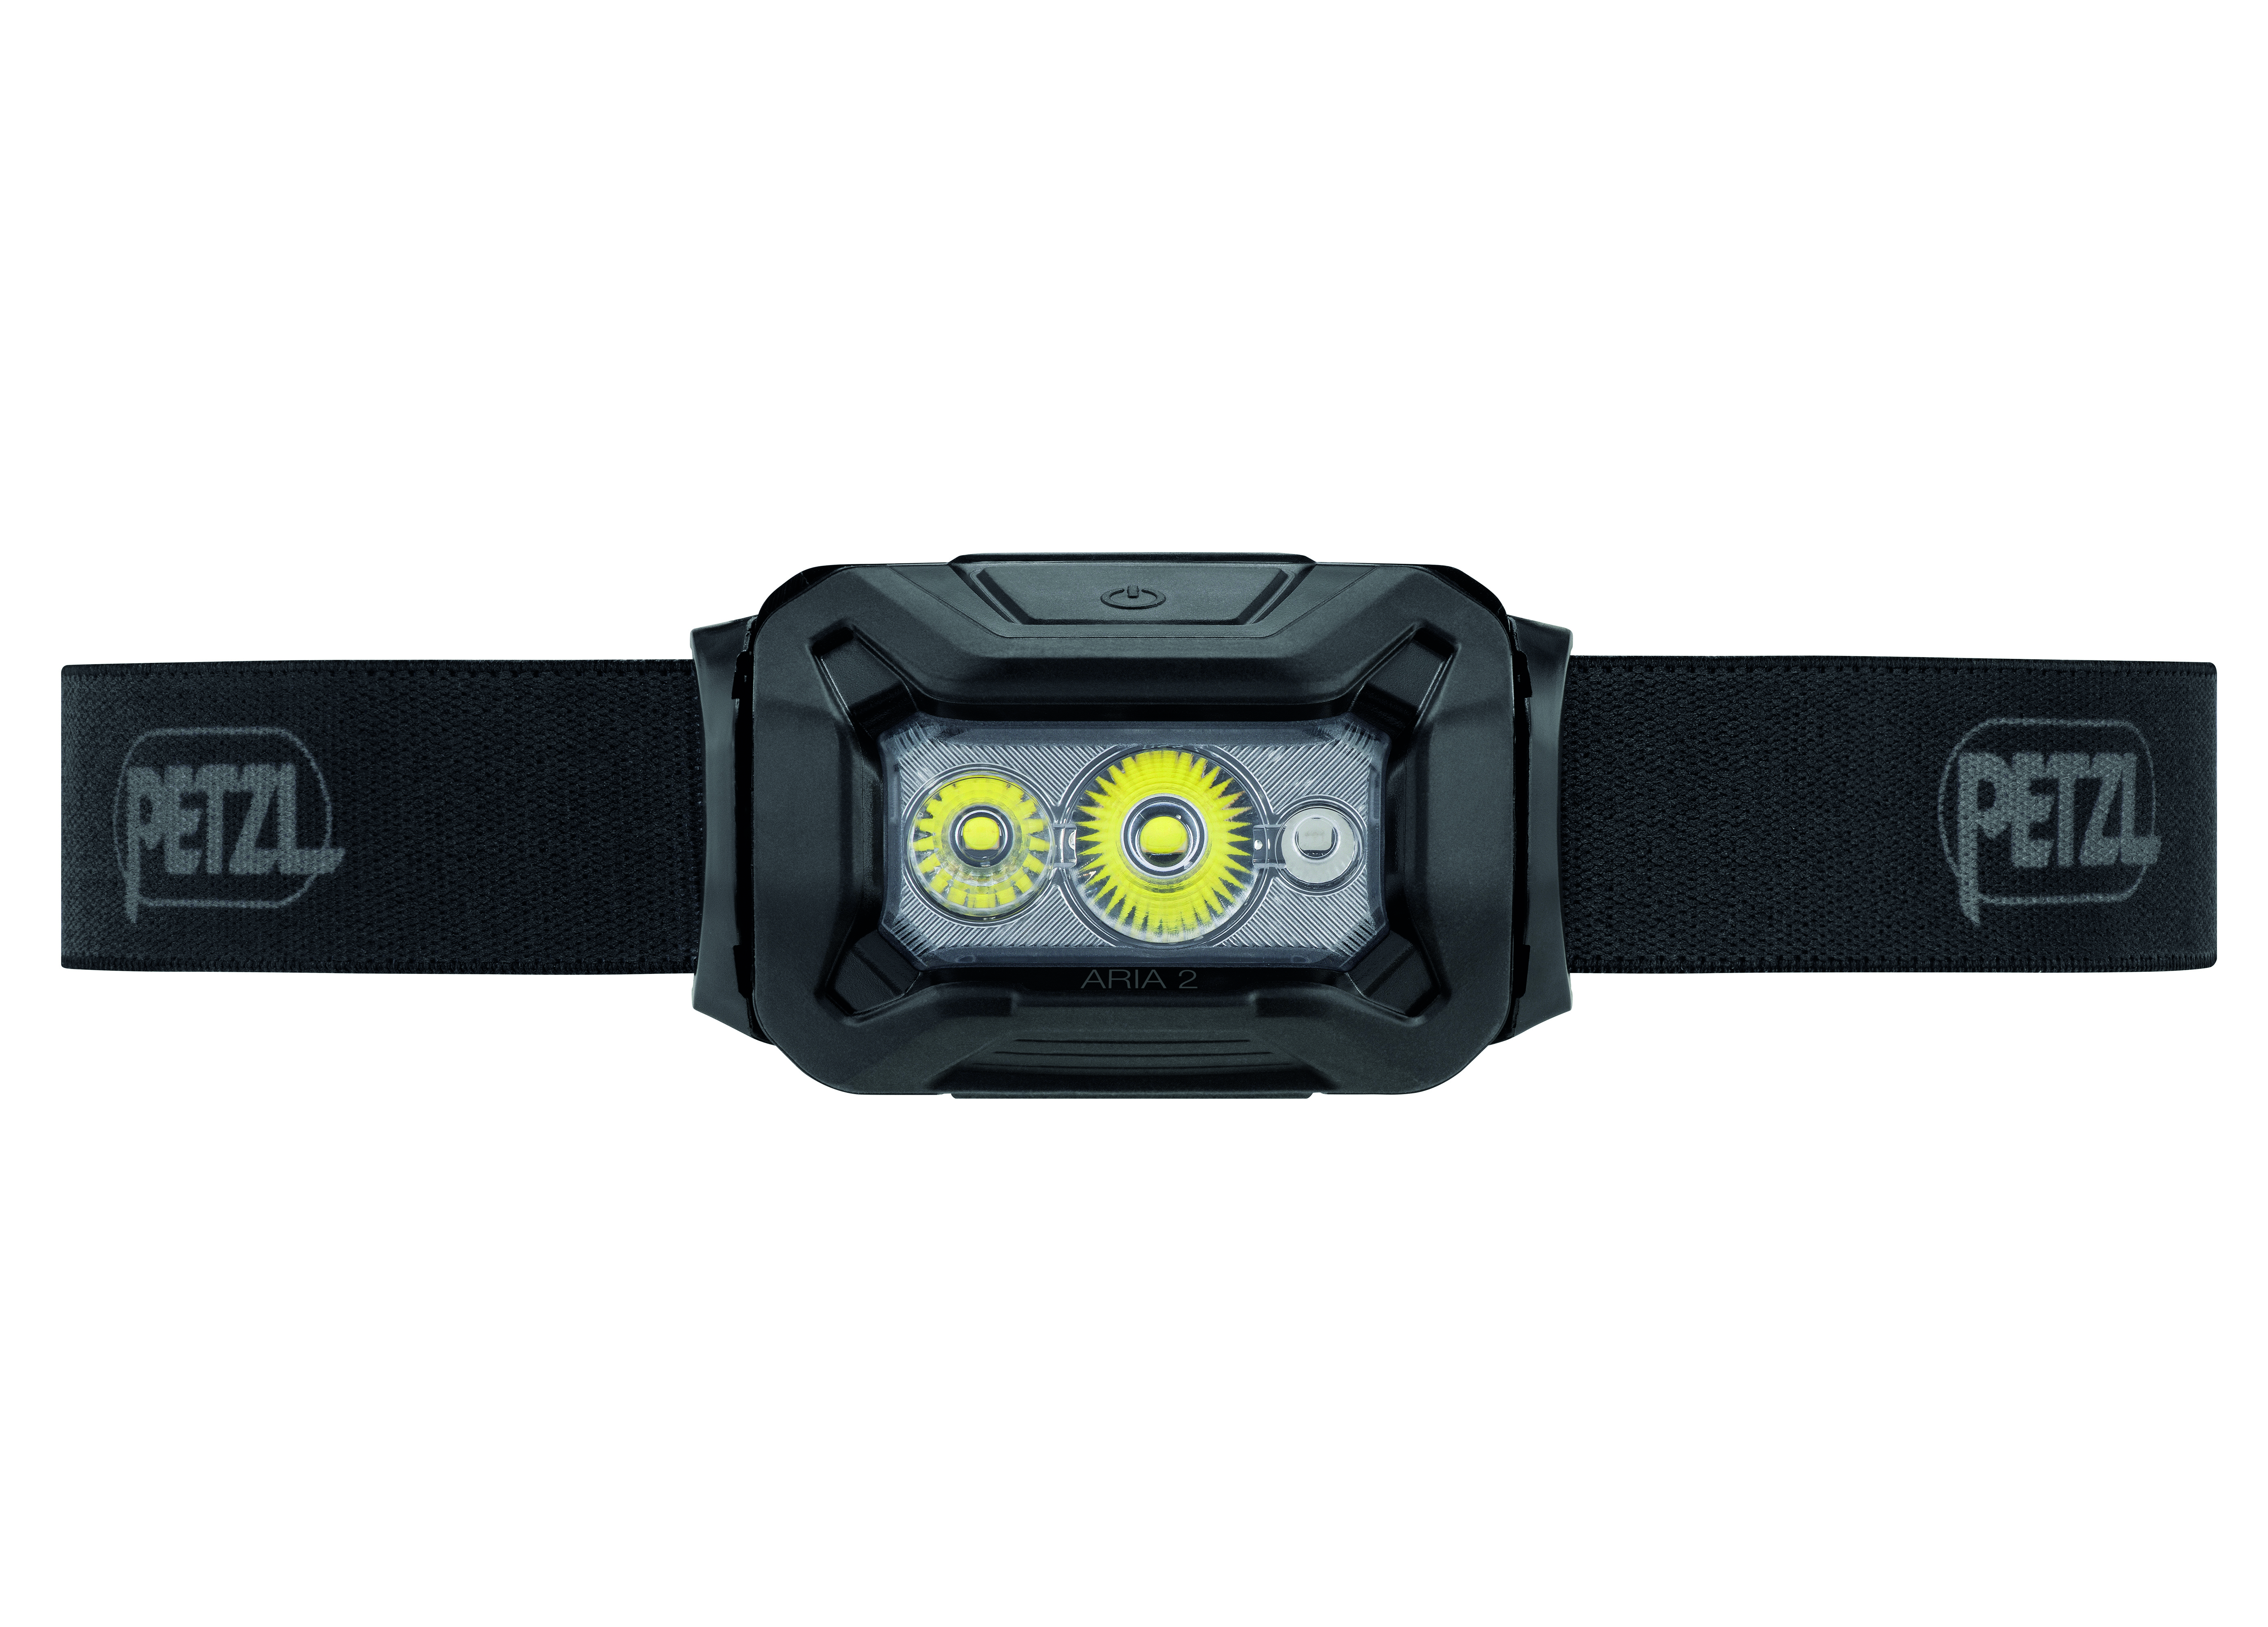 Petzl ARIA 2 RGB Compact Headlamp from Columbia Safety